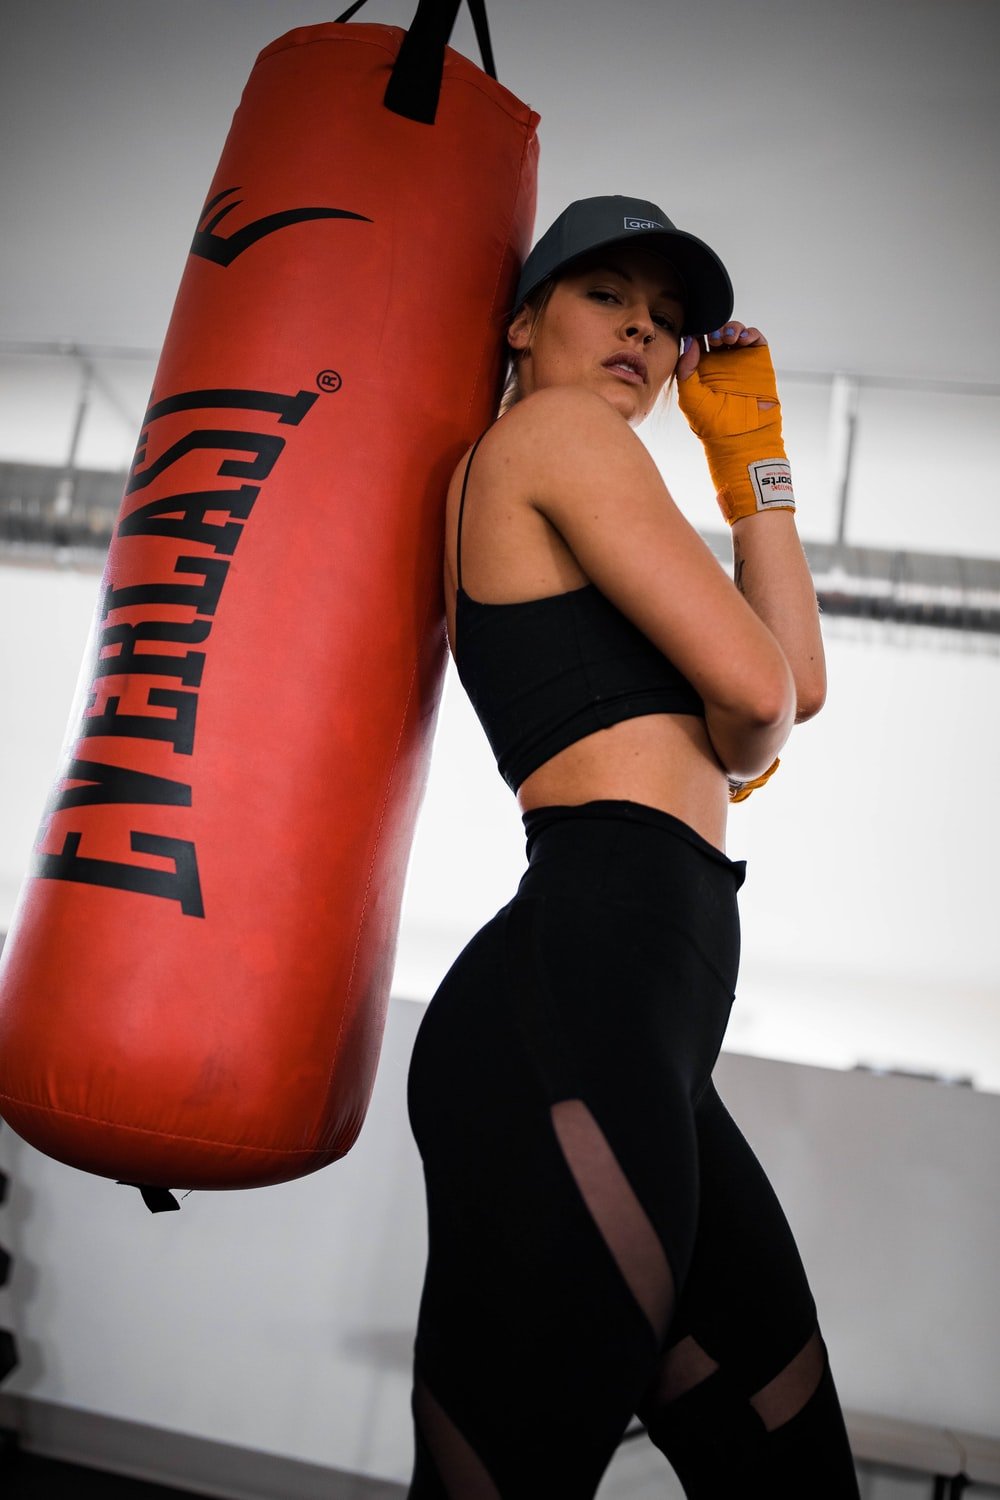 Heavy Bag Picture. Download Free Image